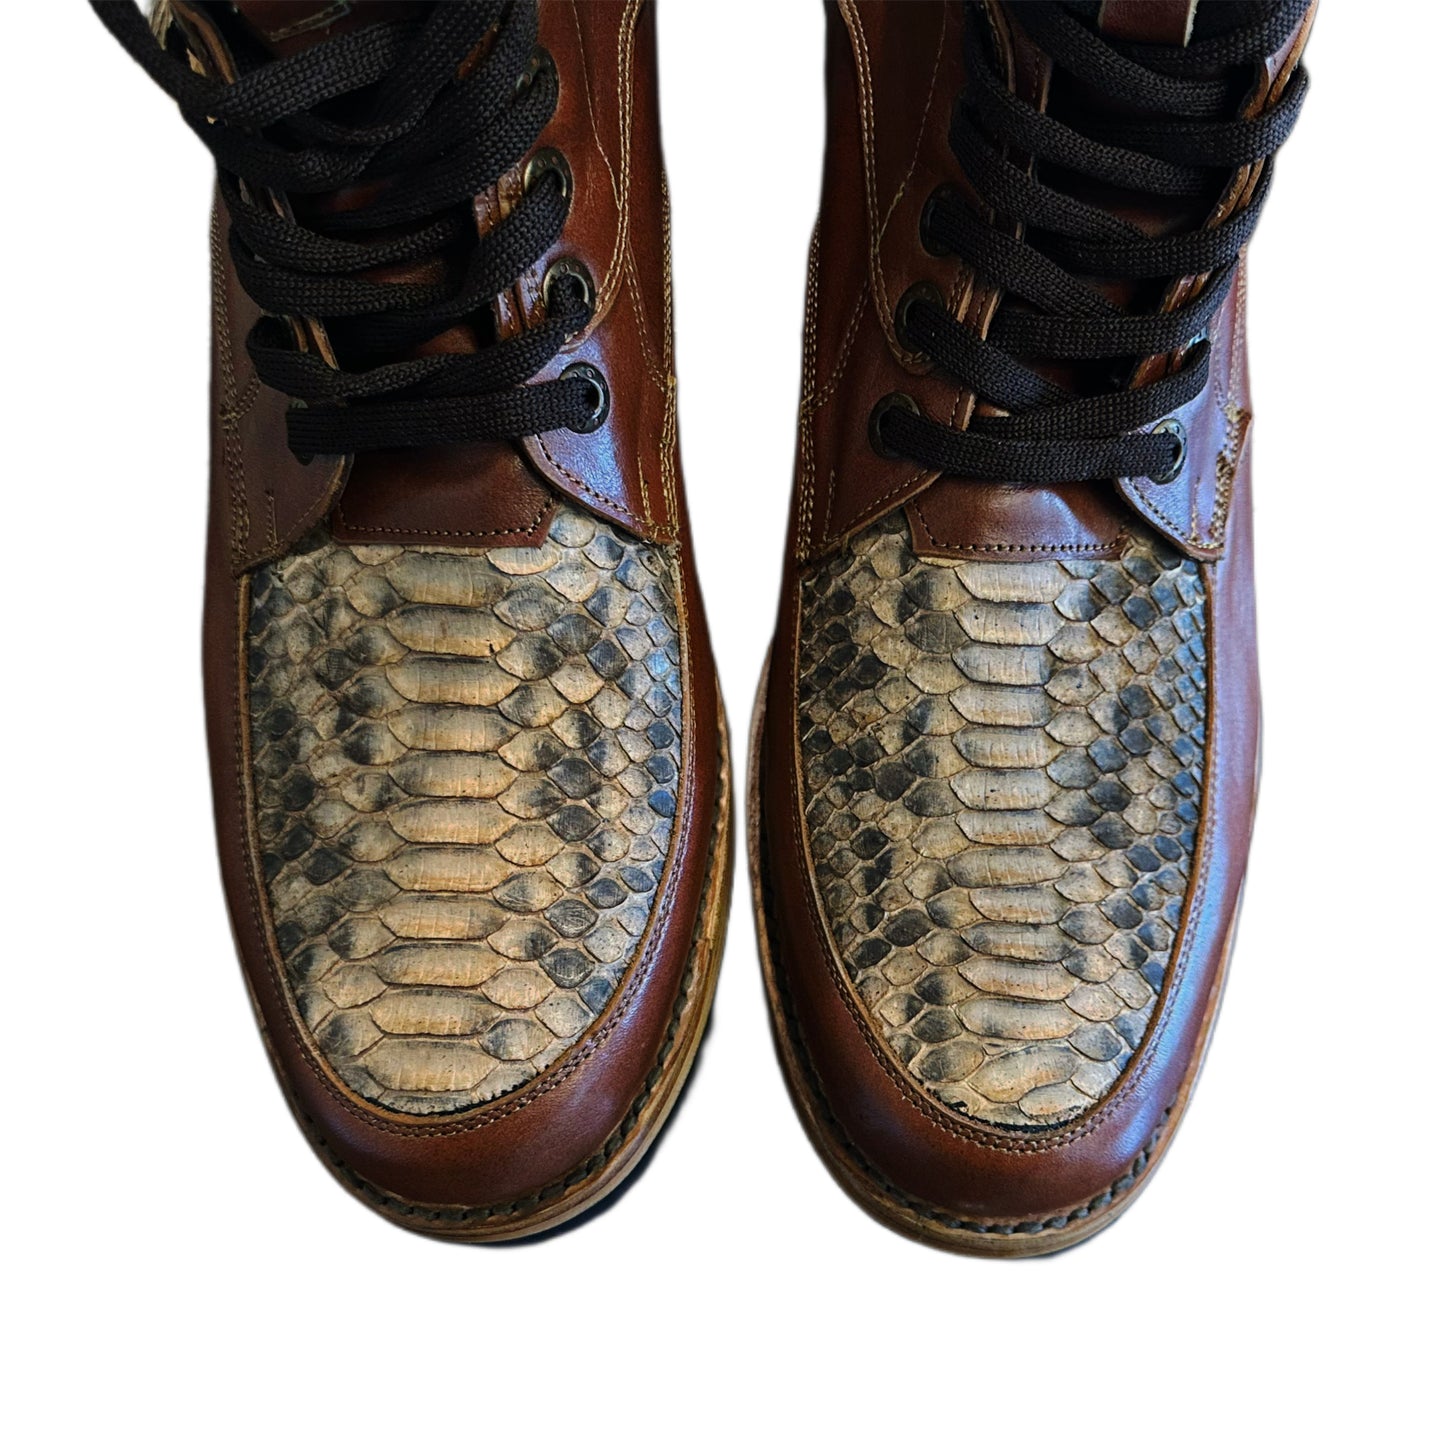 Python Snakeskin Expedition  Lace-Up Hiking Boots